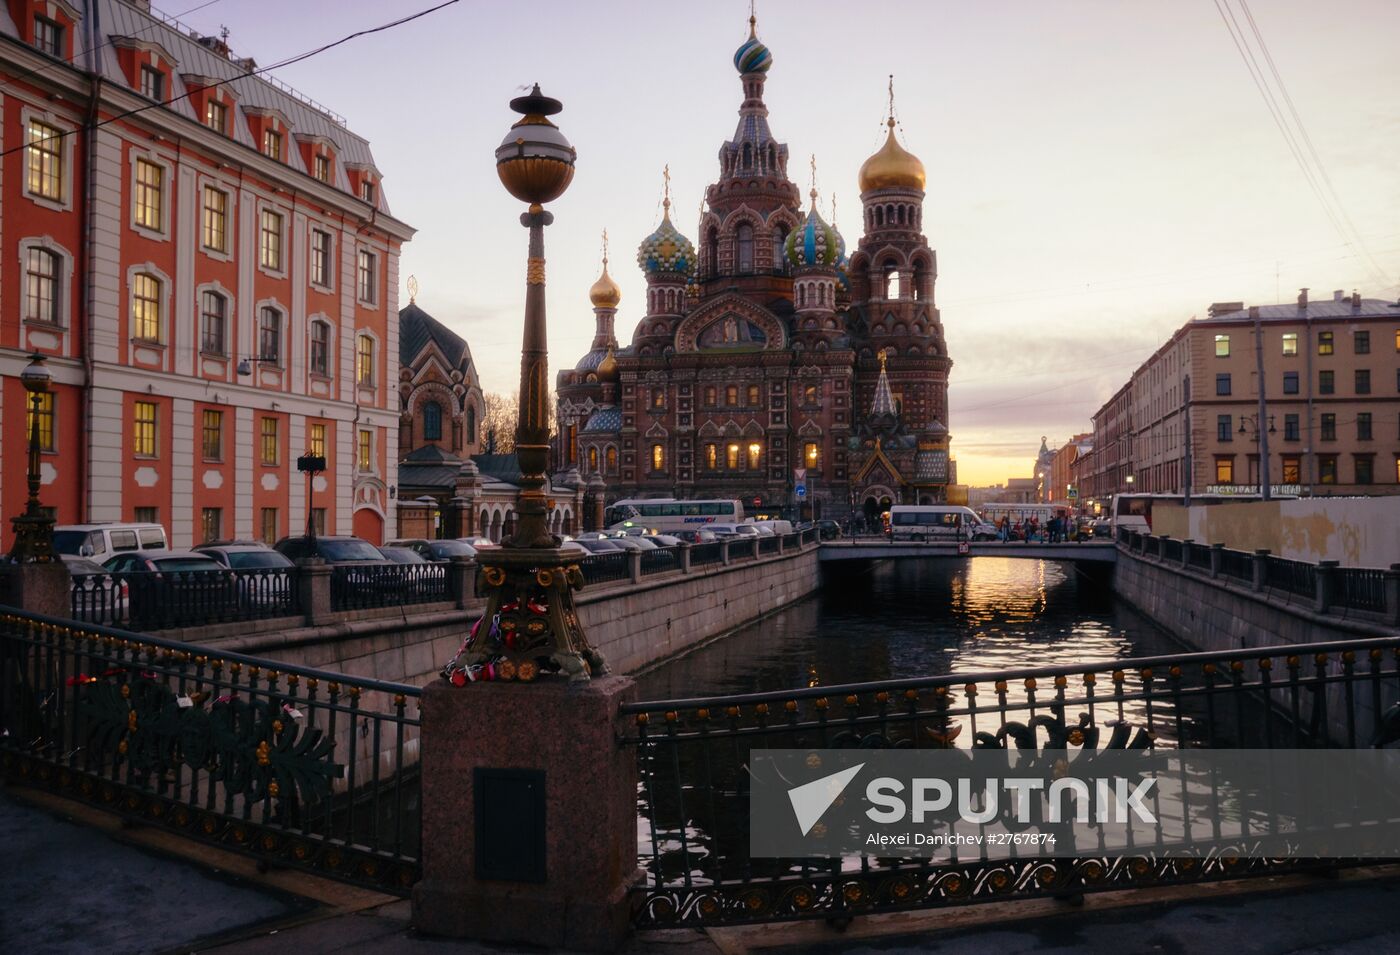 Church of the Savior on Spilled Blood in St. Petersburg named one of the world's most beautiful churches